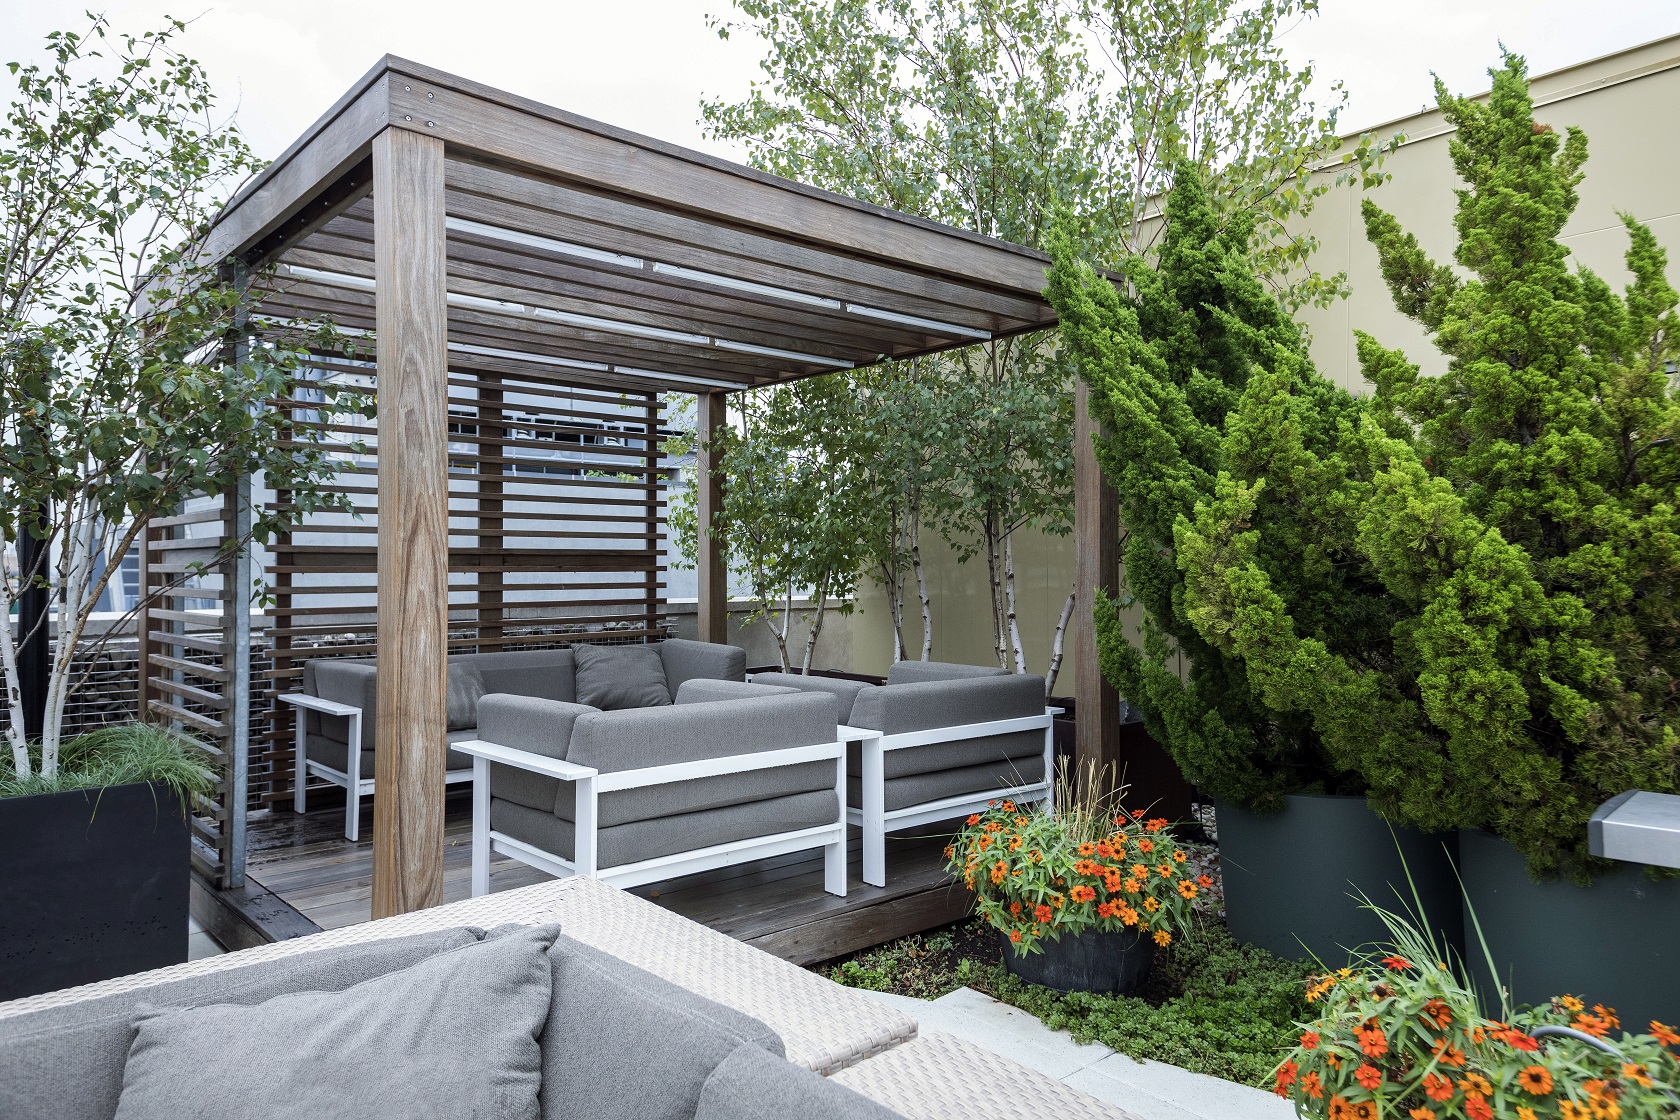 Expertly maintained specimen trees mix with perennials to encompass this sizeable outdoor rooftop, providing entertainment area